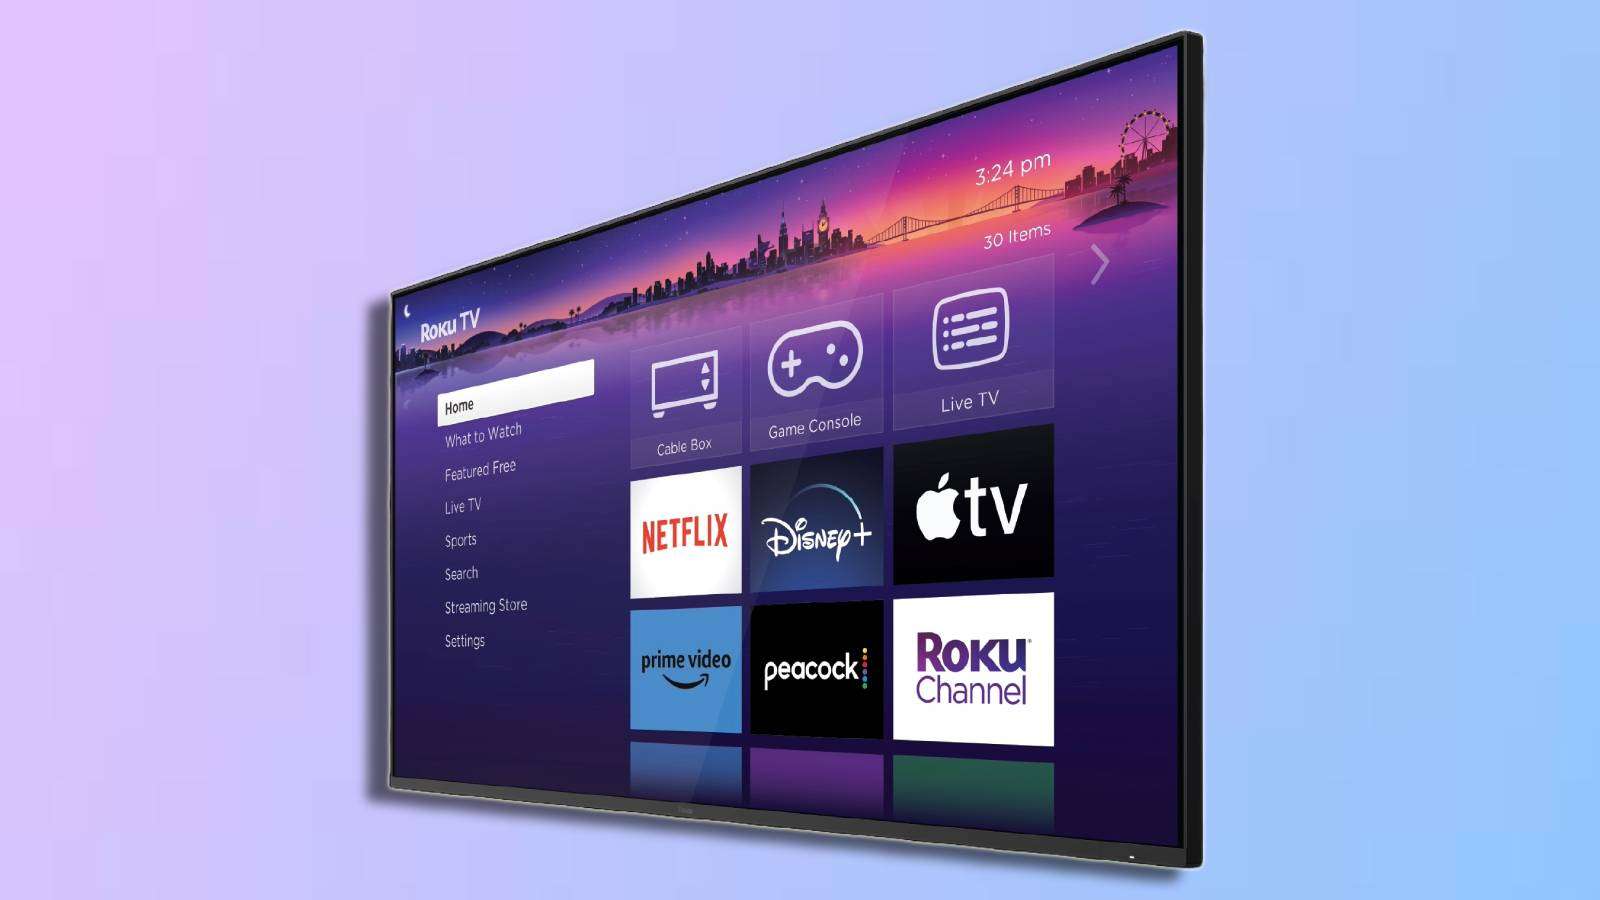 Roku says its new Pro TVs are made to elevate the streaming experience ...